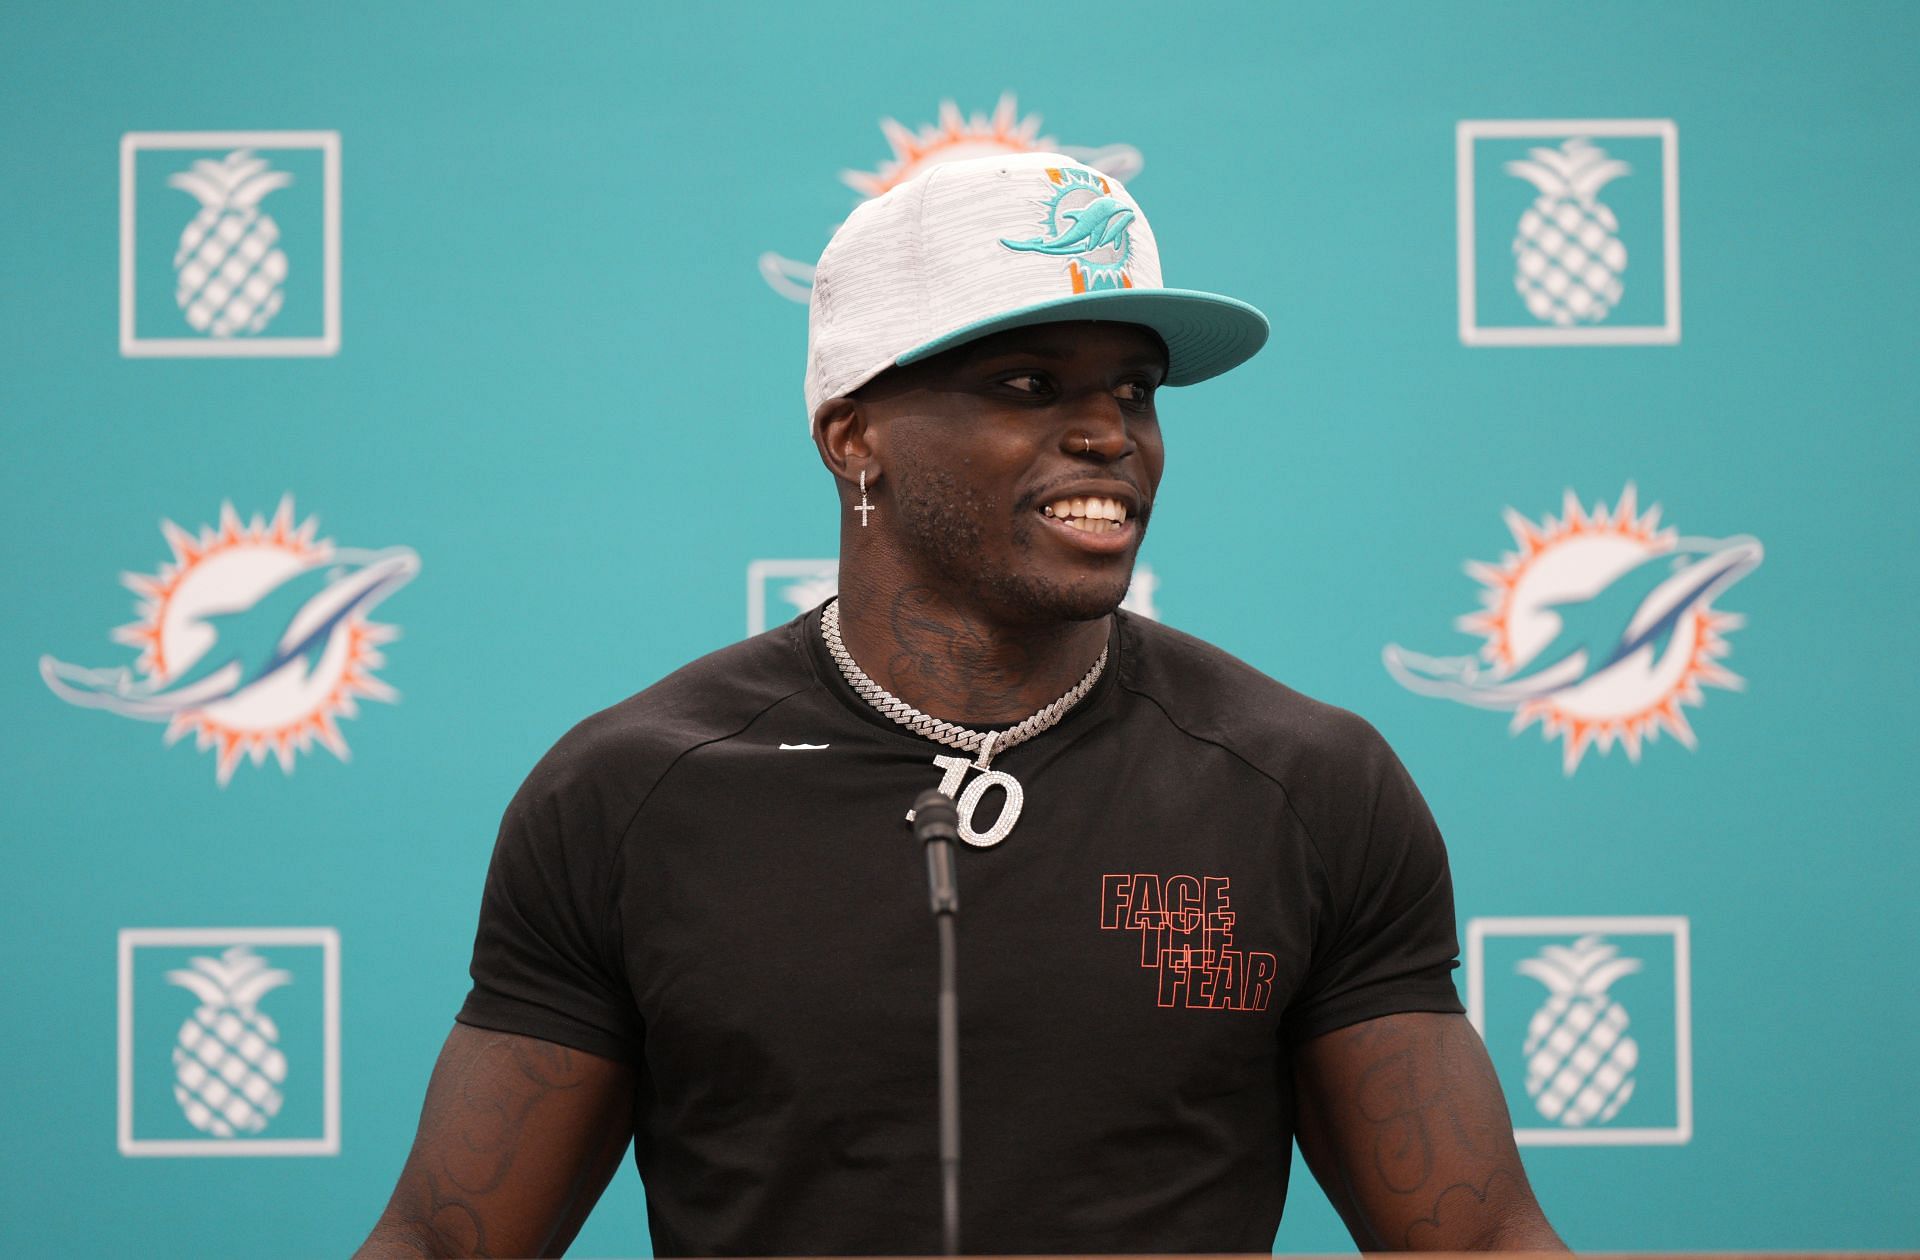 Hill at his Miami Dolphins Press Conference